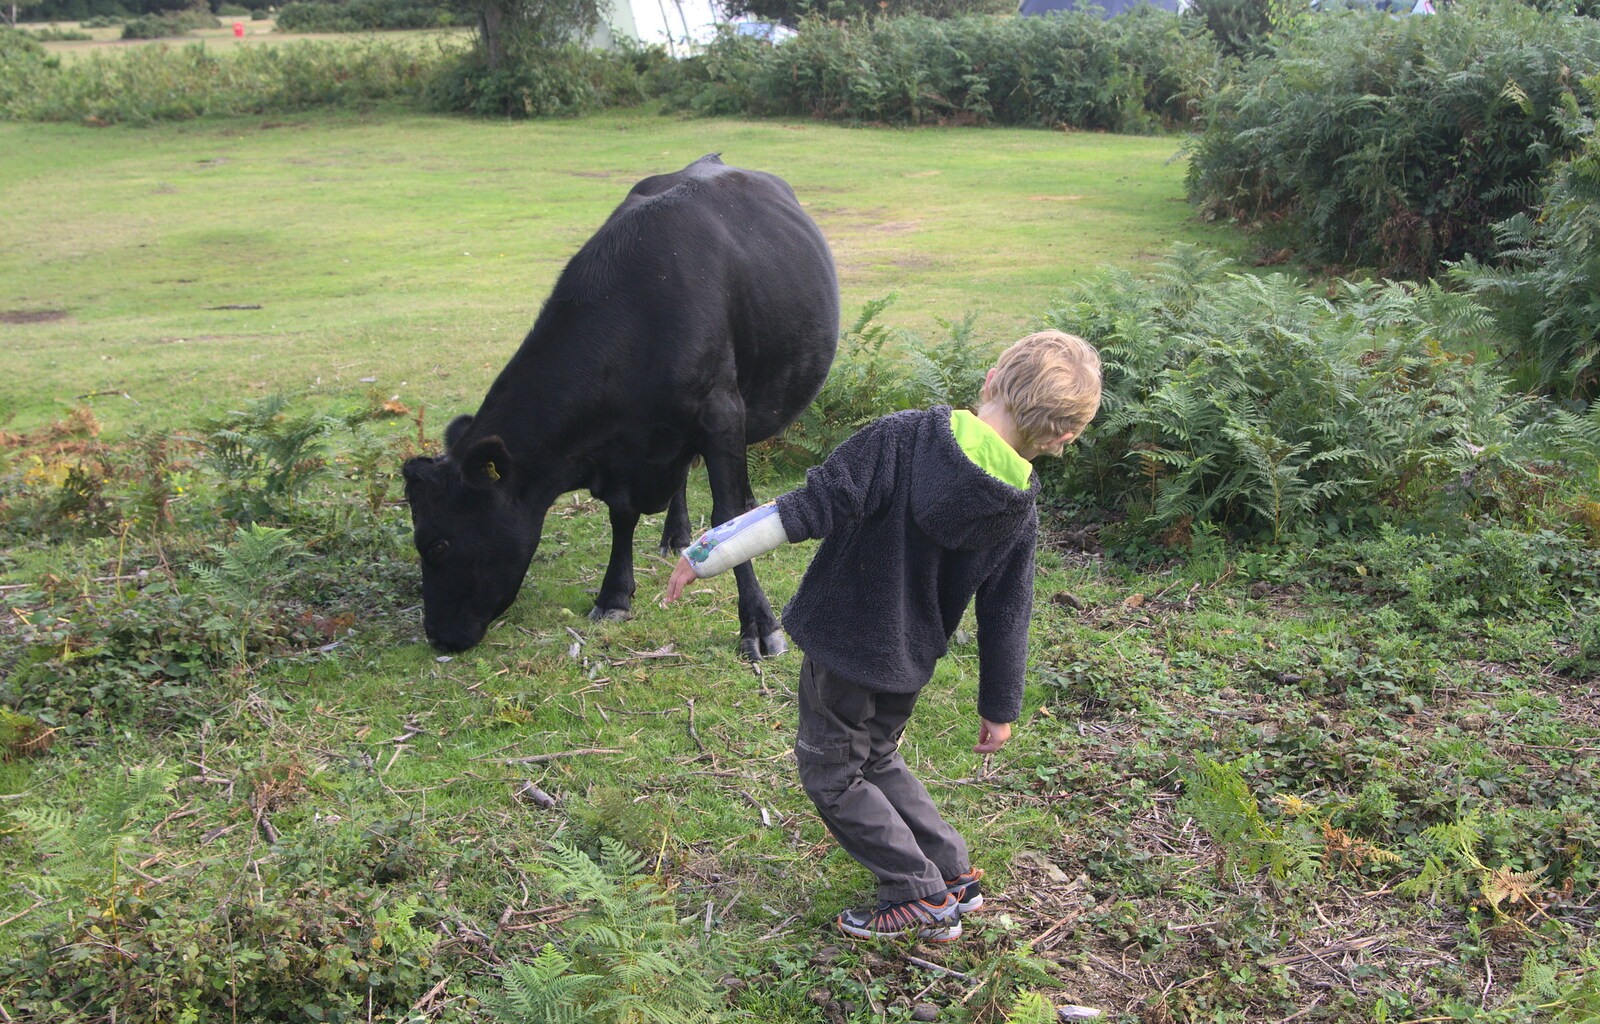 Fred checks to see if this cow has udders or not from Camping at Roundhills, Brockenhurst, New Forest, Hampshire - 29th August 2015